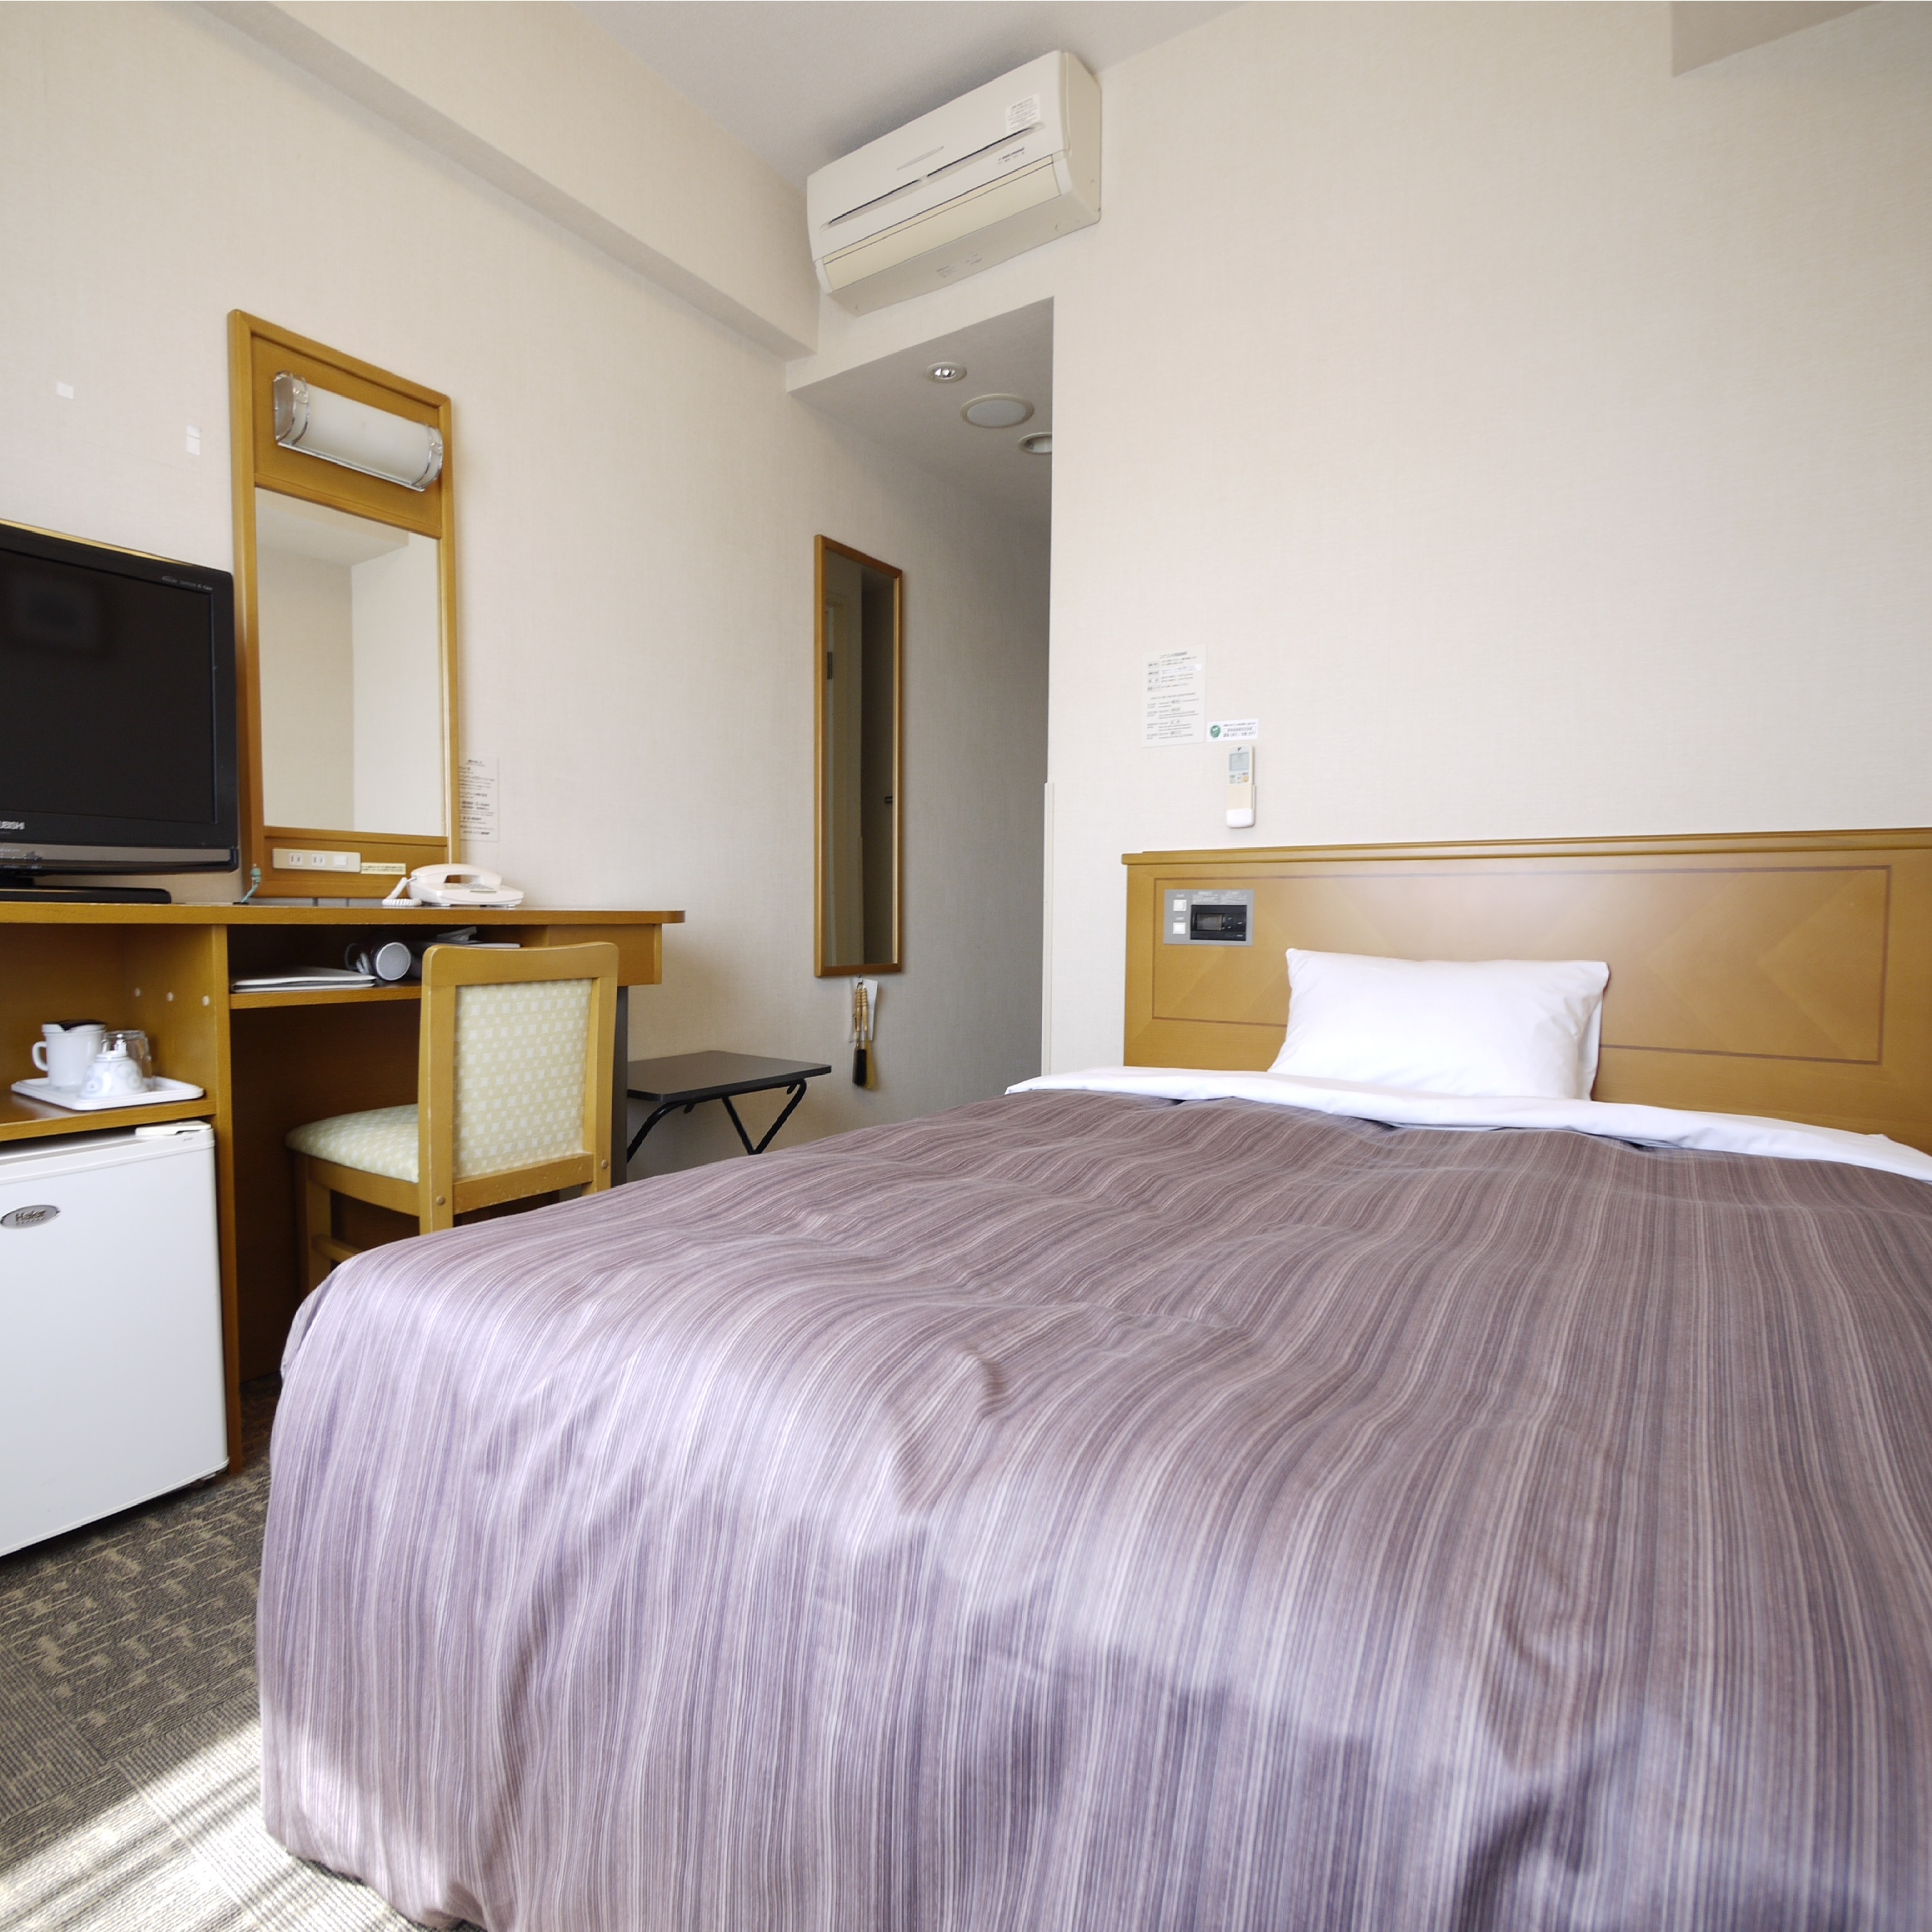 The single room has a semi-double bed with a bed width of 140 cm, so you can relax.